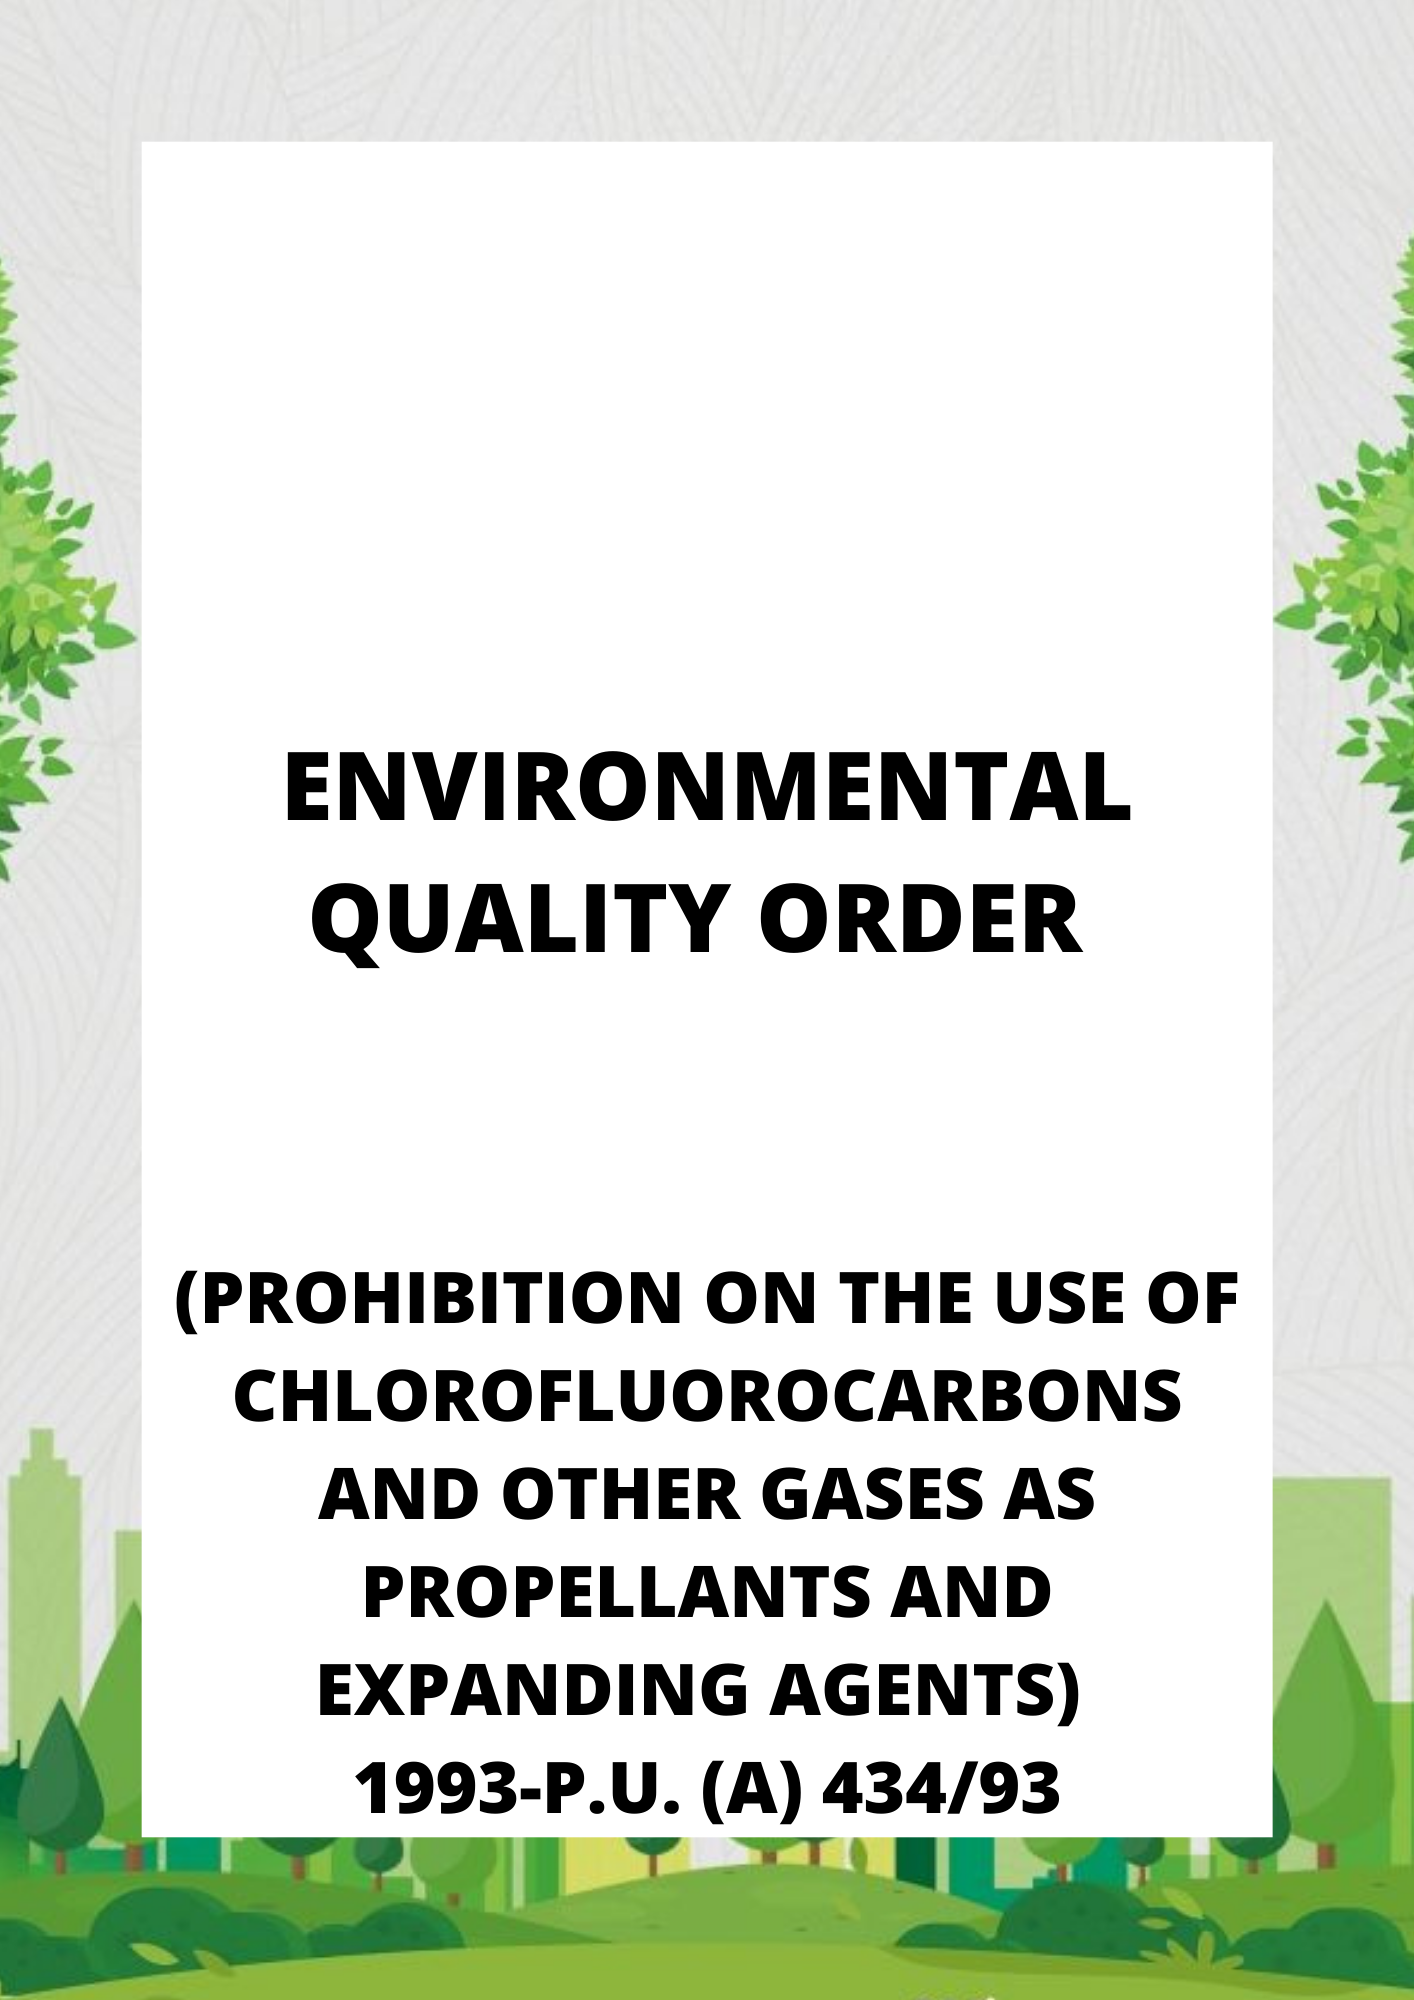 Environmental Quality Order (Prohibition On The Use Of Chlorofluorocarbons And Other Gases As Propellants And Expanding Agents) 1993-P.U. (A) 43493